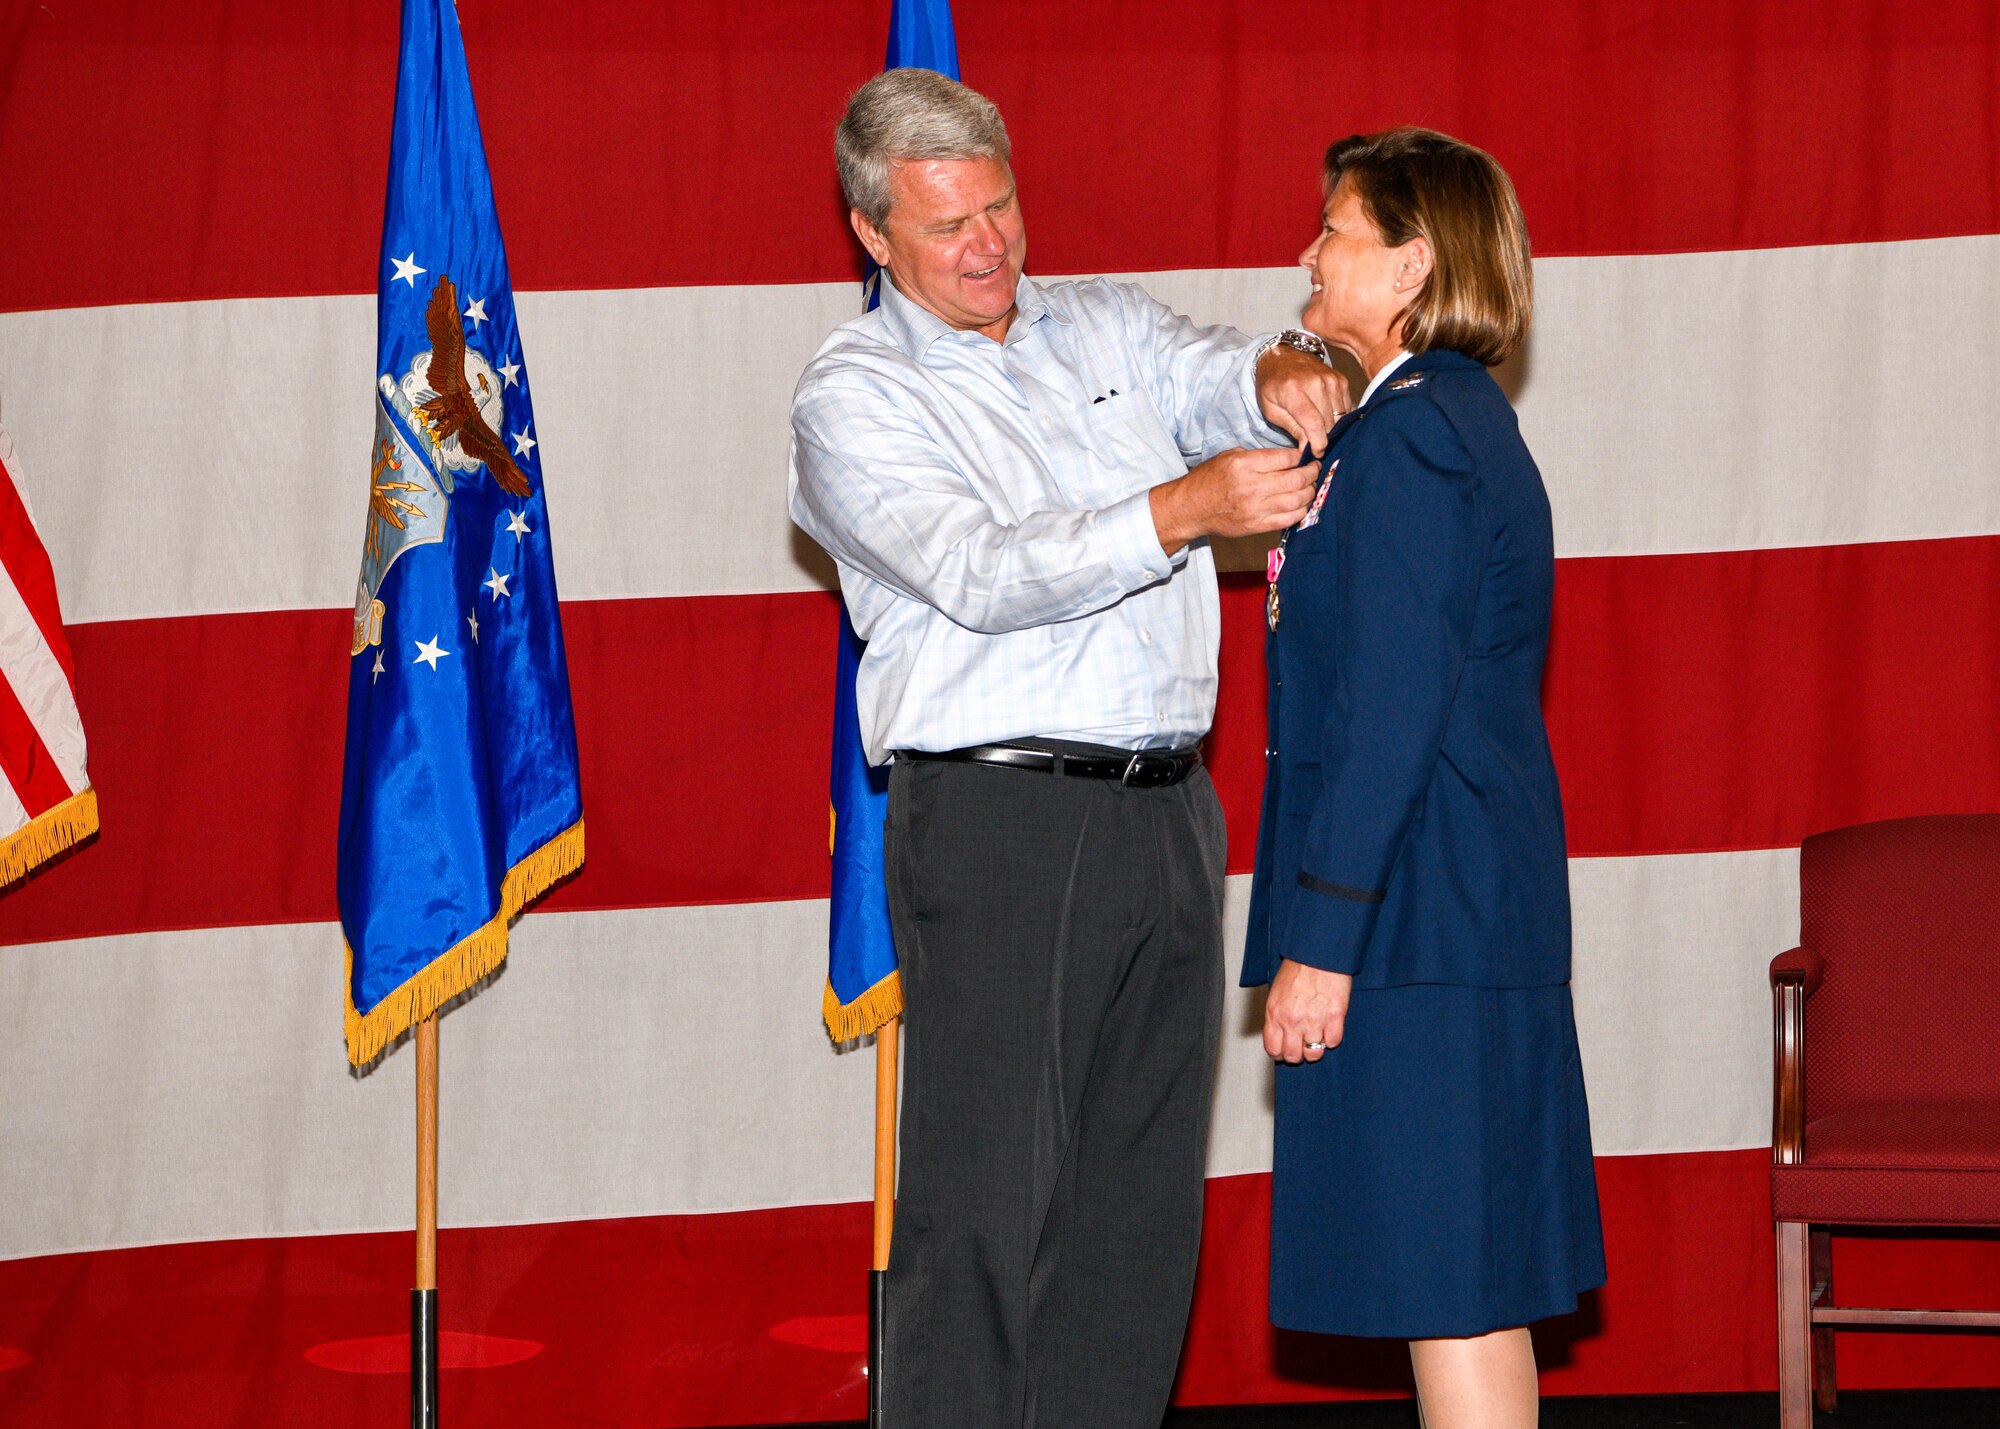 Colonel Elizabeth "Beth" Kwasny had a retirement pin pinned on her by husband, James Kwasny during a retirement ceremony at the Naval Air Station Joint Reserve Base Fort Worth, Texas on Saturday, April 30, 2022. Kwasny served as the Inspection General for the 301st Fighter Wing, where she has been since 2006.